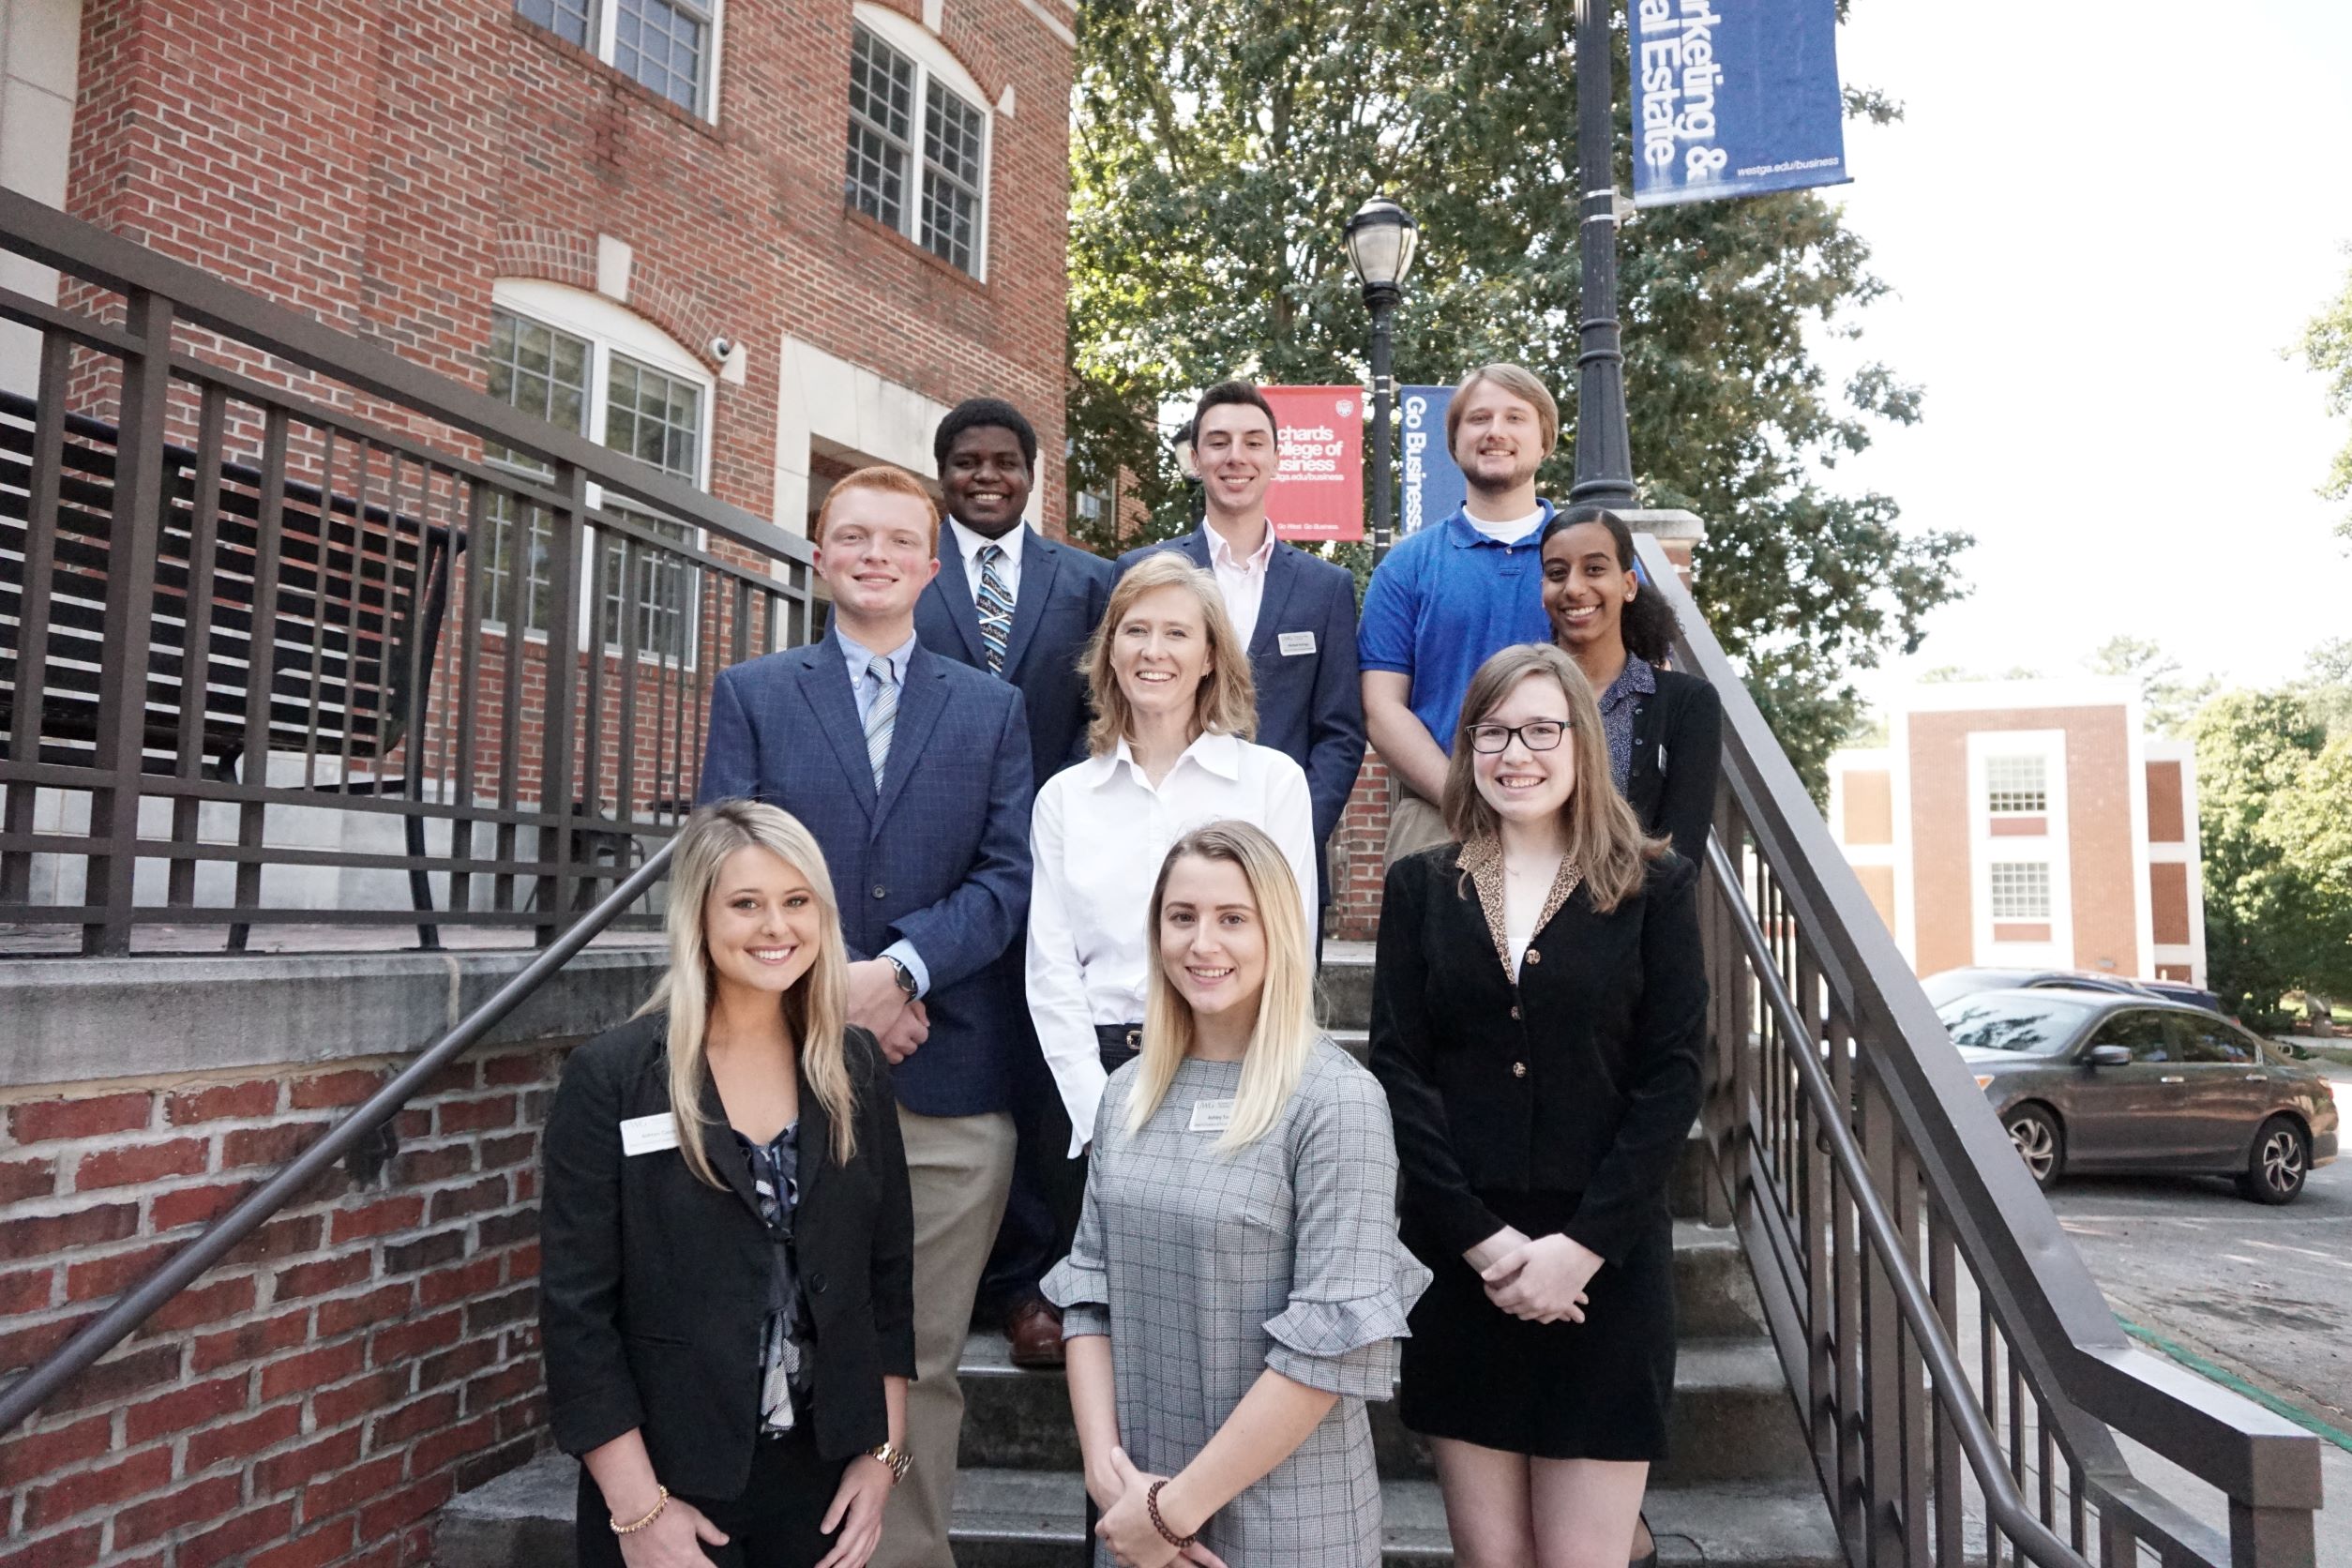 Previous members of the Dean's Council of Student Leaders 2019 to 2020